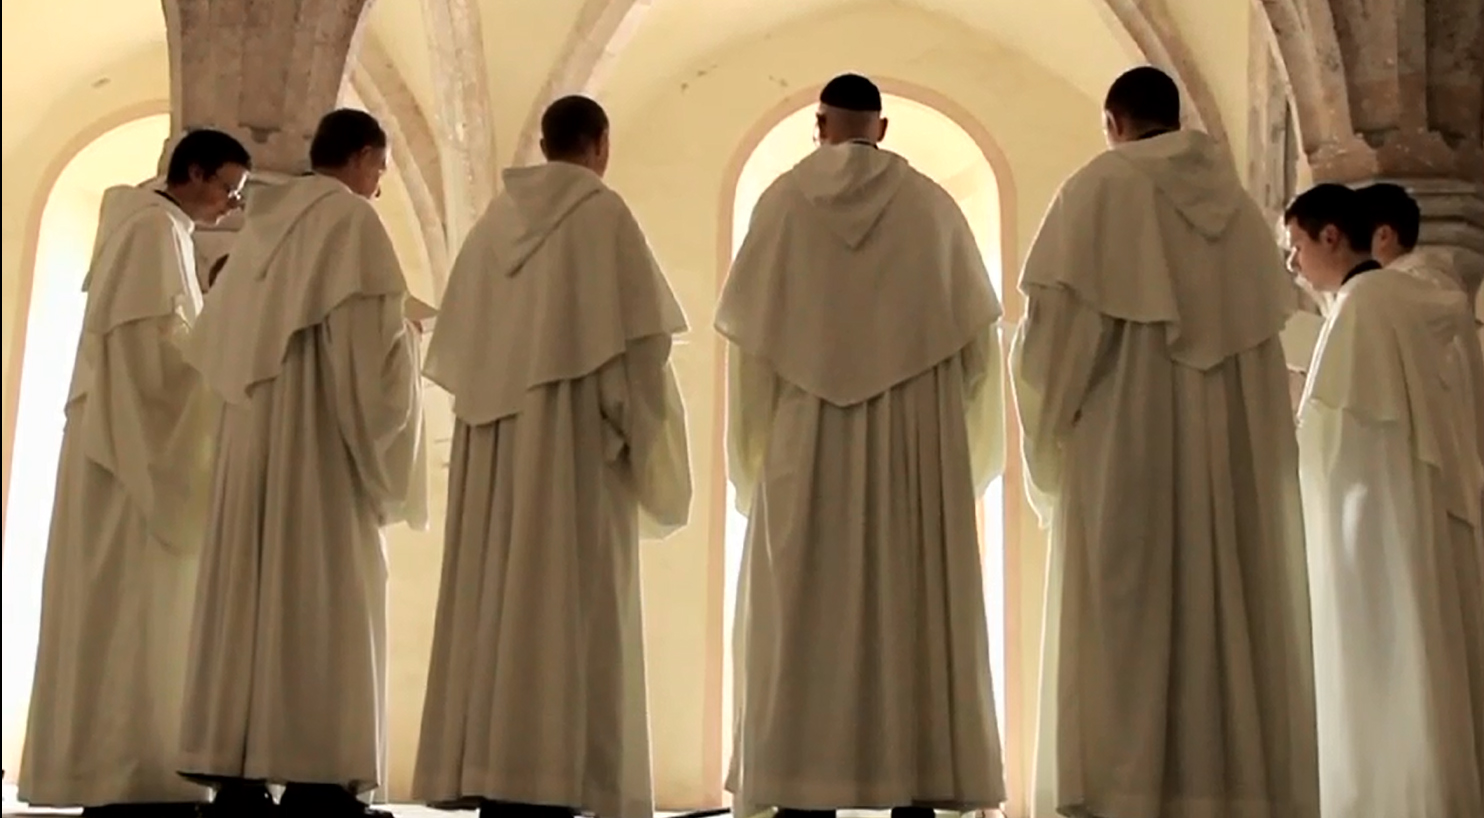 "Gregorian Chant: The Music of Angels" premieres this spring on EWTN.